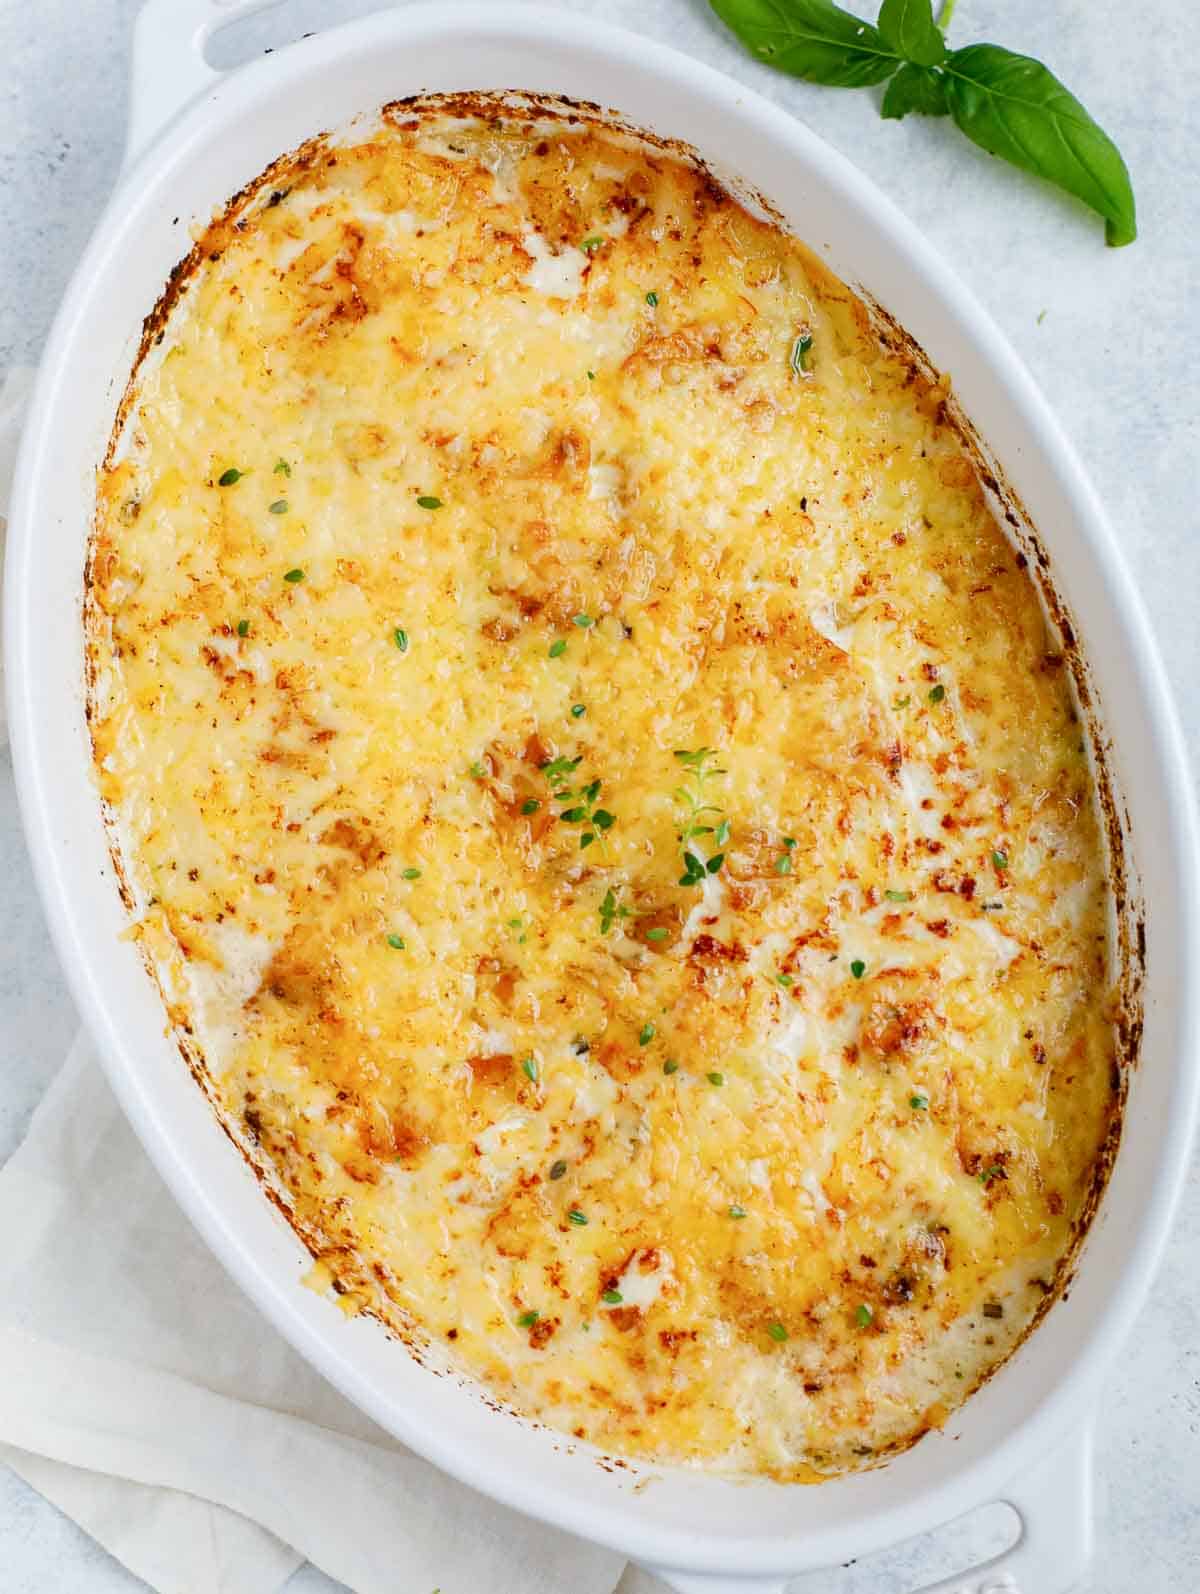 Top down shot of the au gratin potatoes in a white dish.